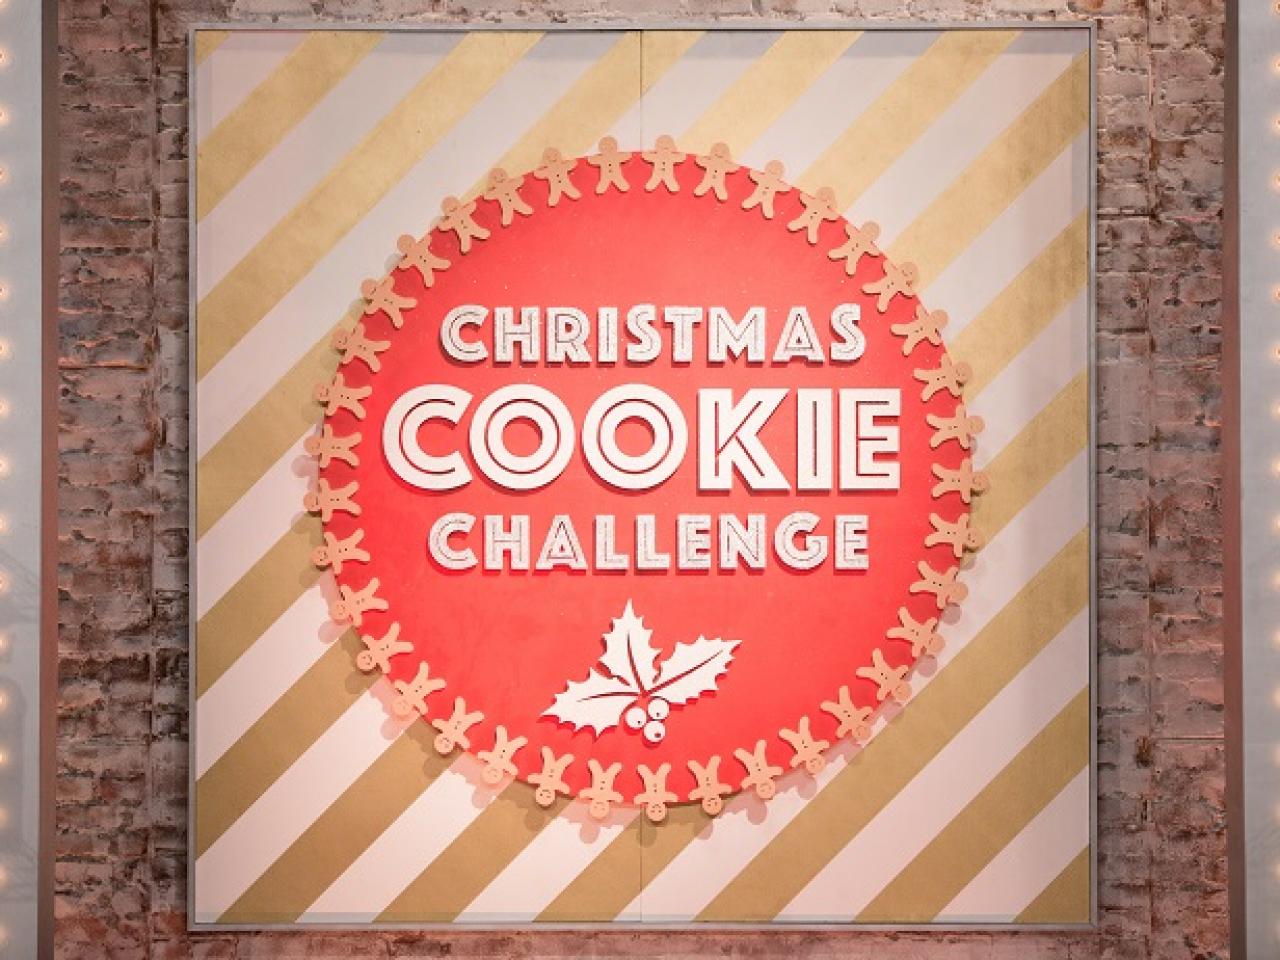 Winner of the Christmas Cookie Challenge FN Dish BehindtheScenes, Food Trends, and Best